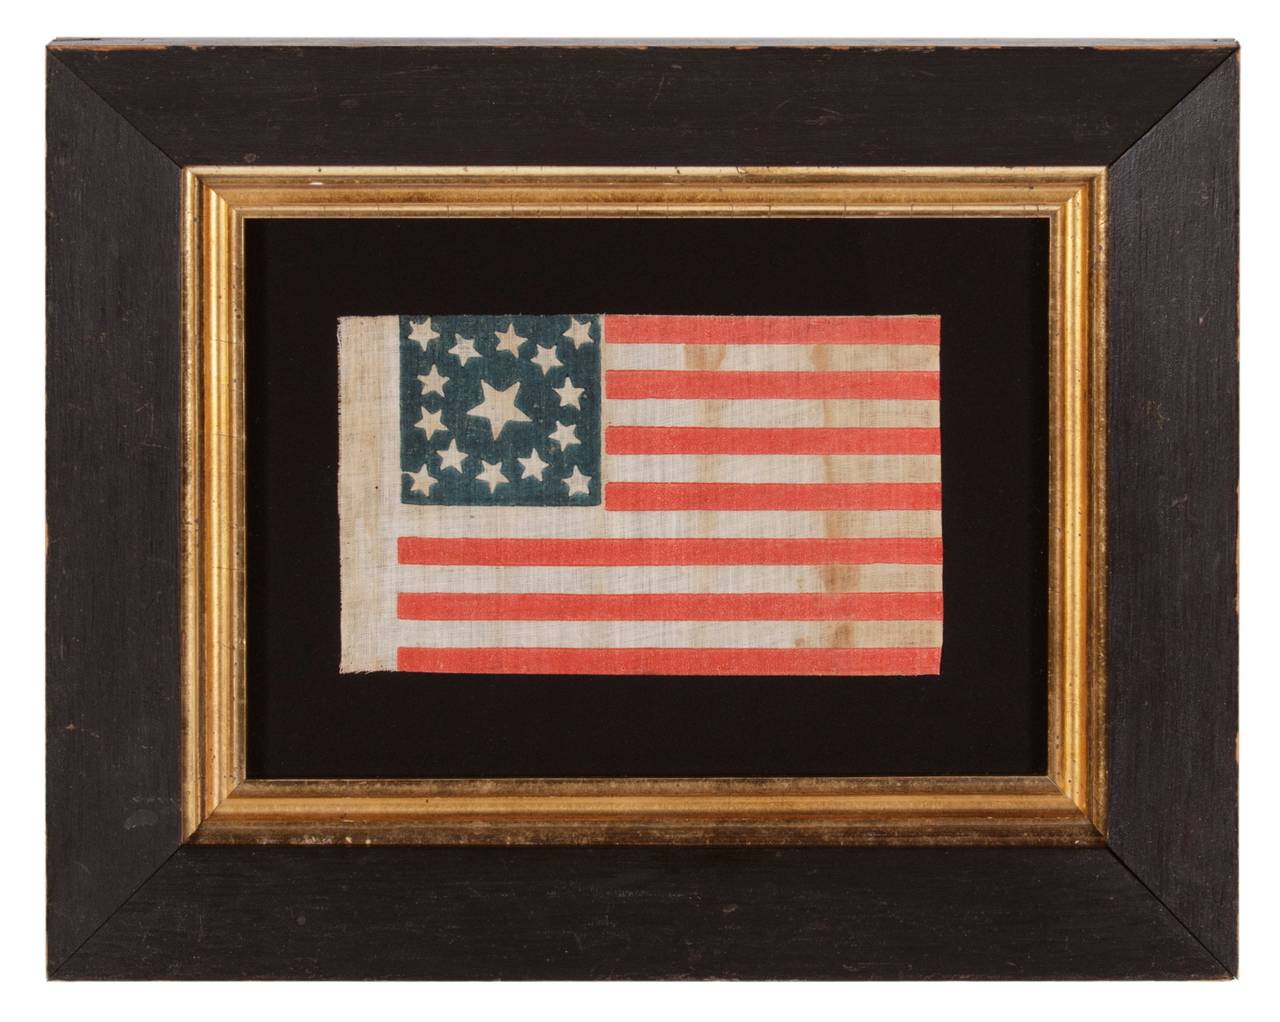 15 stars, made either to celebrate Kentucky statehood or to glorify the south, 1861-1876, very rare.

 15 star American parade flag with 13 stripes, printed on coarse, glazed cotton. The stars are arranged in a medallion configuration that